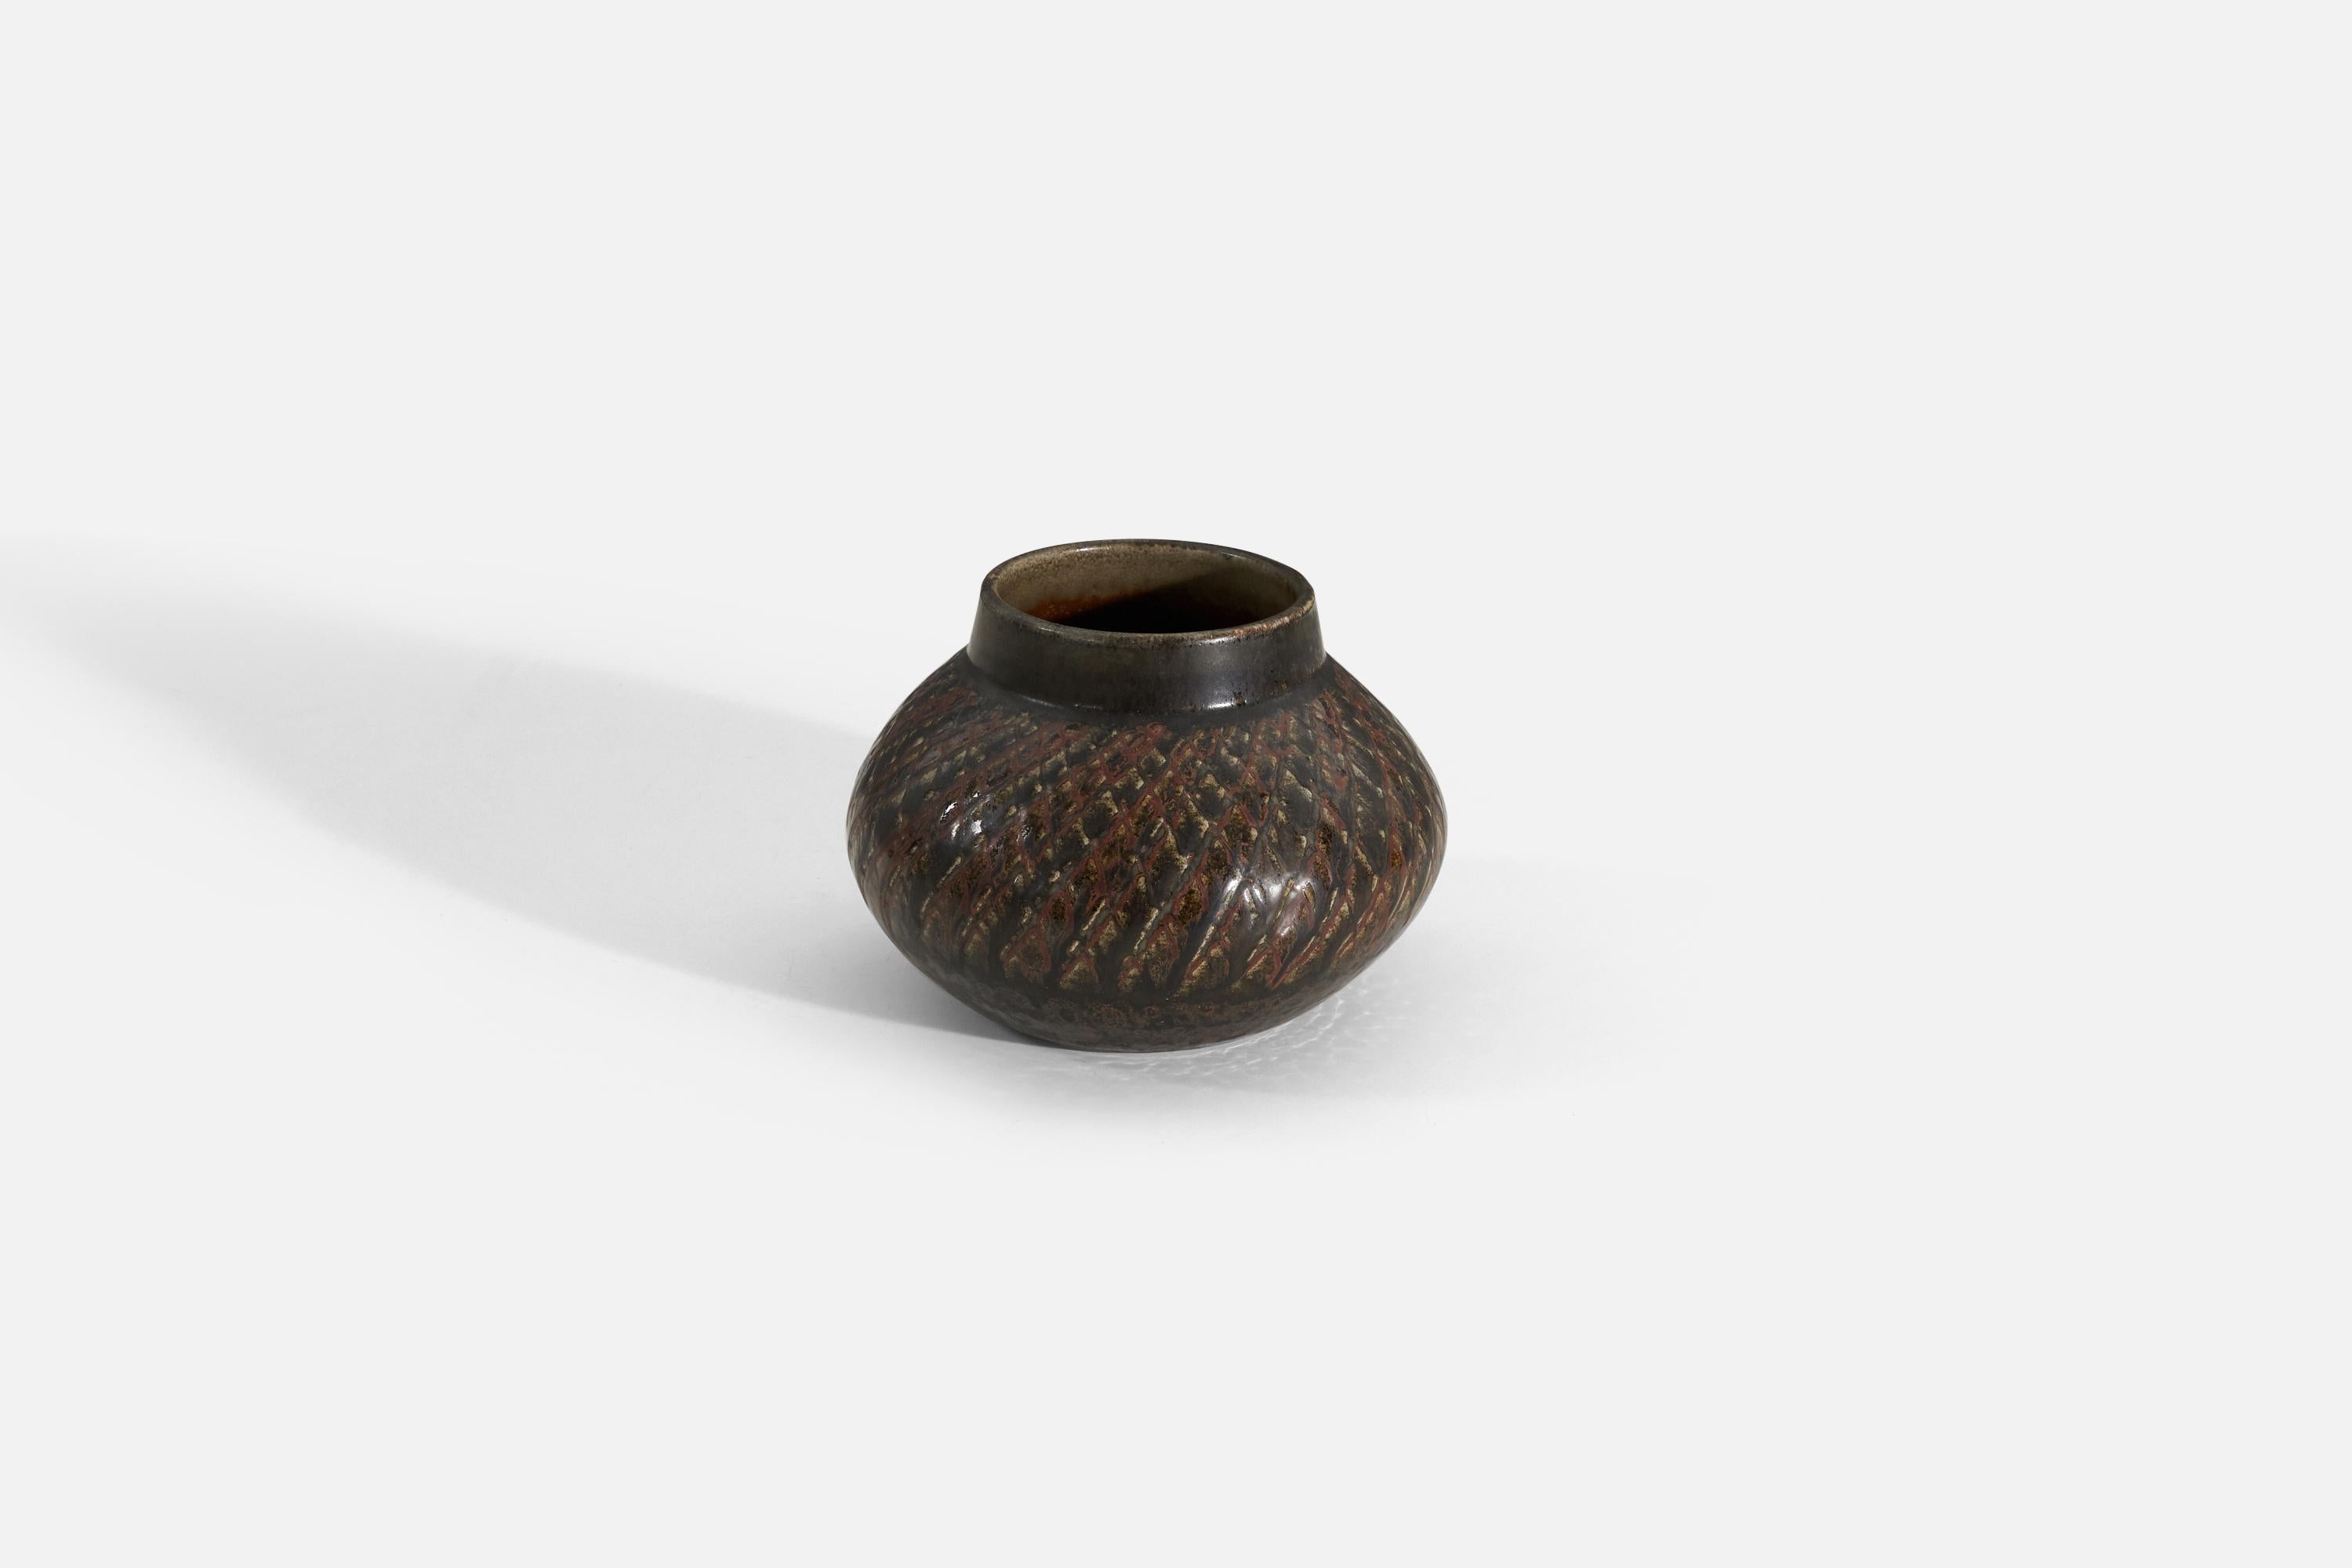 A brown glazed stoneware vase designed and produced by Carl-Harry Stålhane. Produced by Rörstrand, Sweden, 1960s.